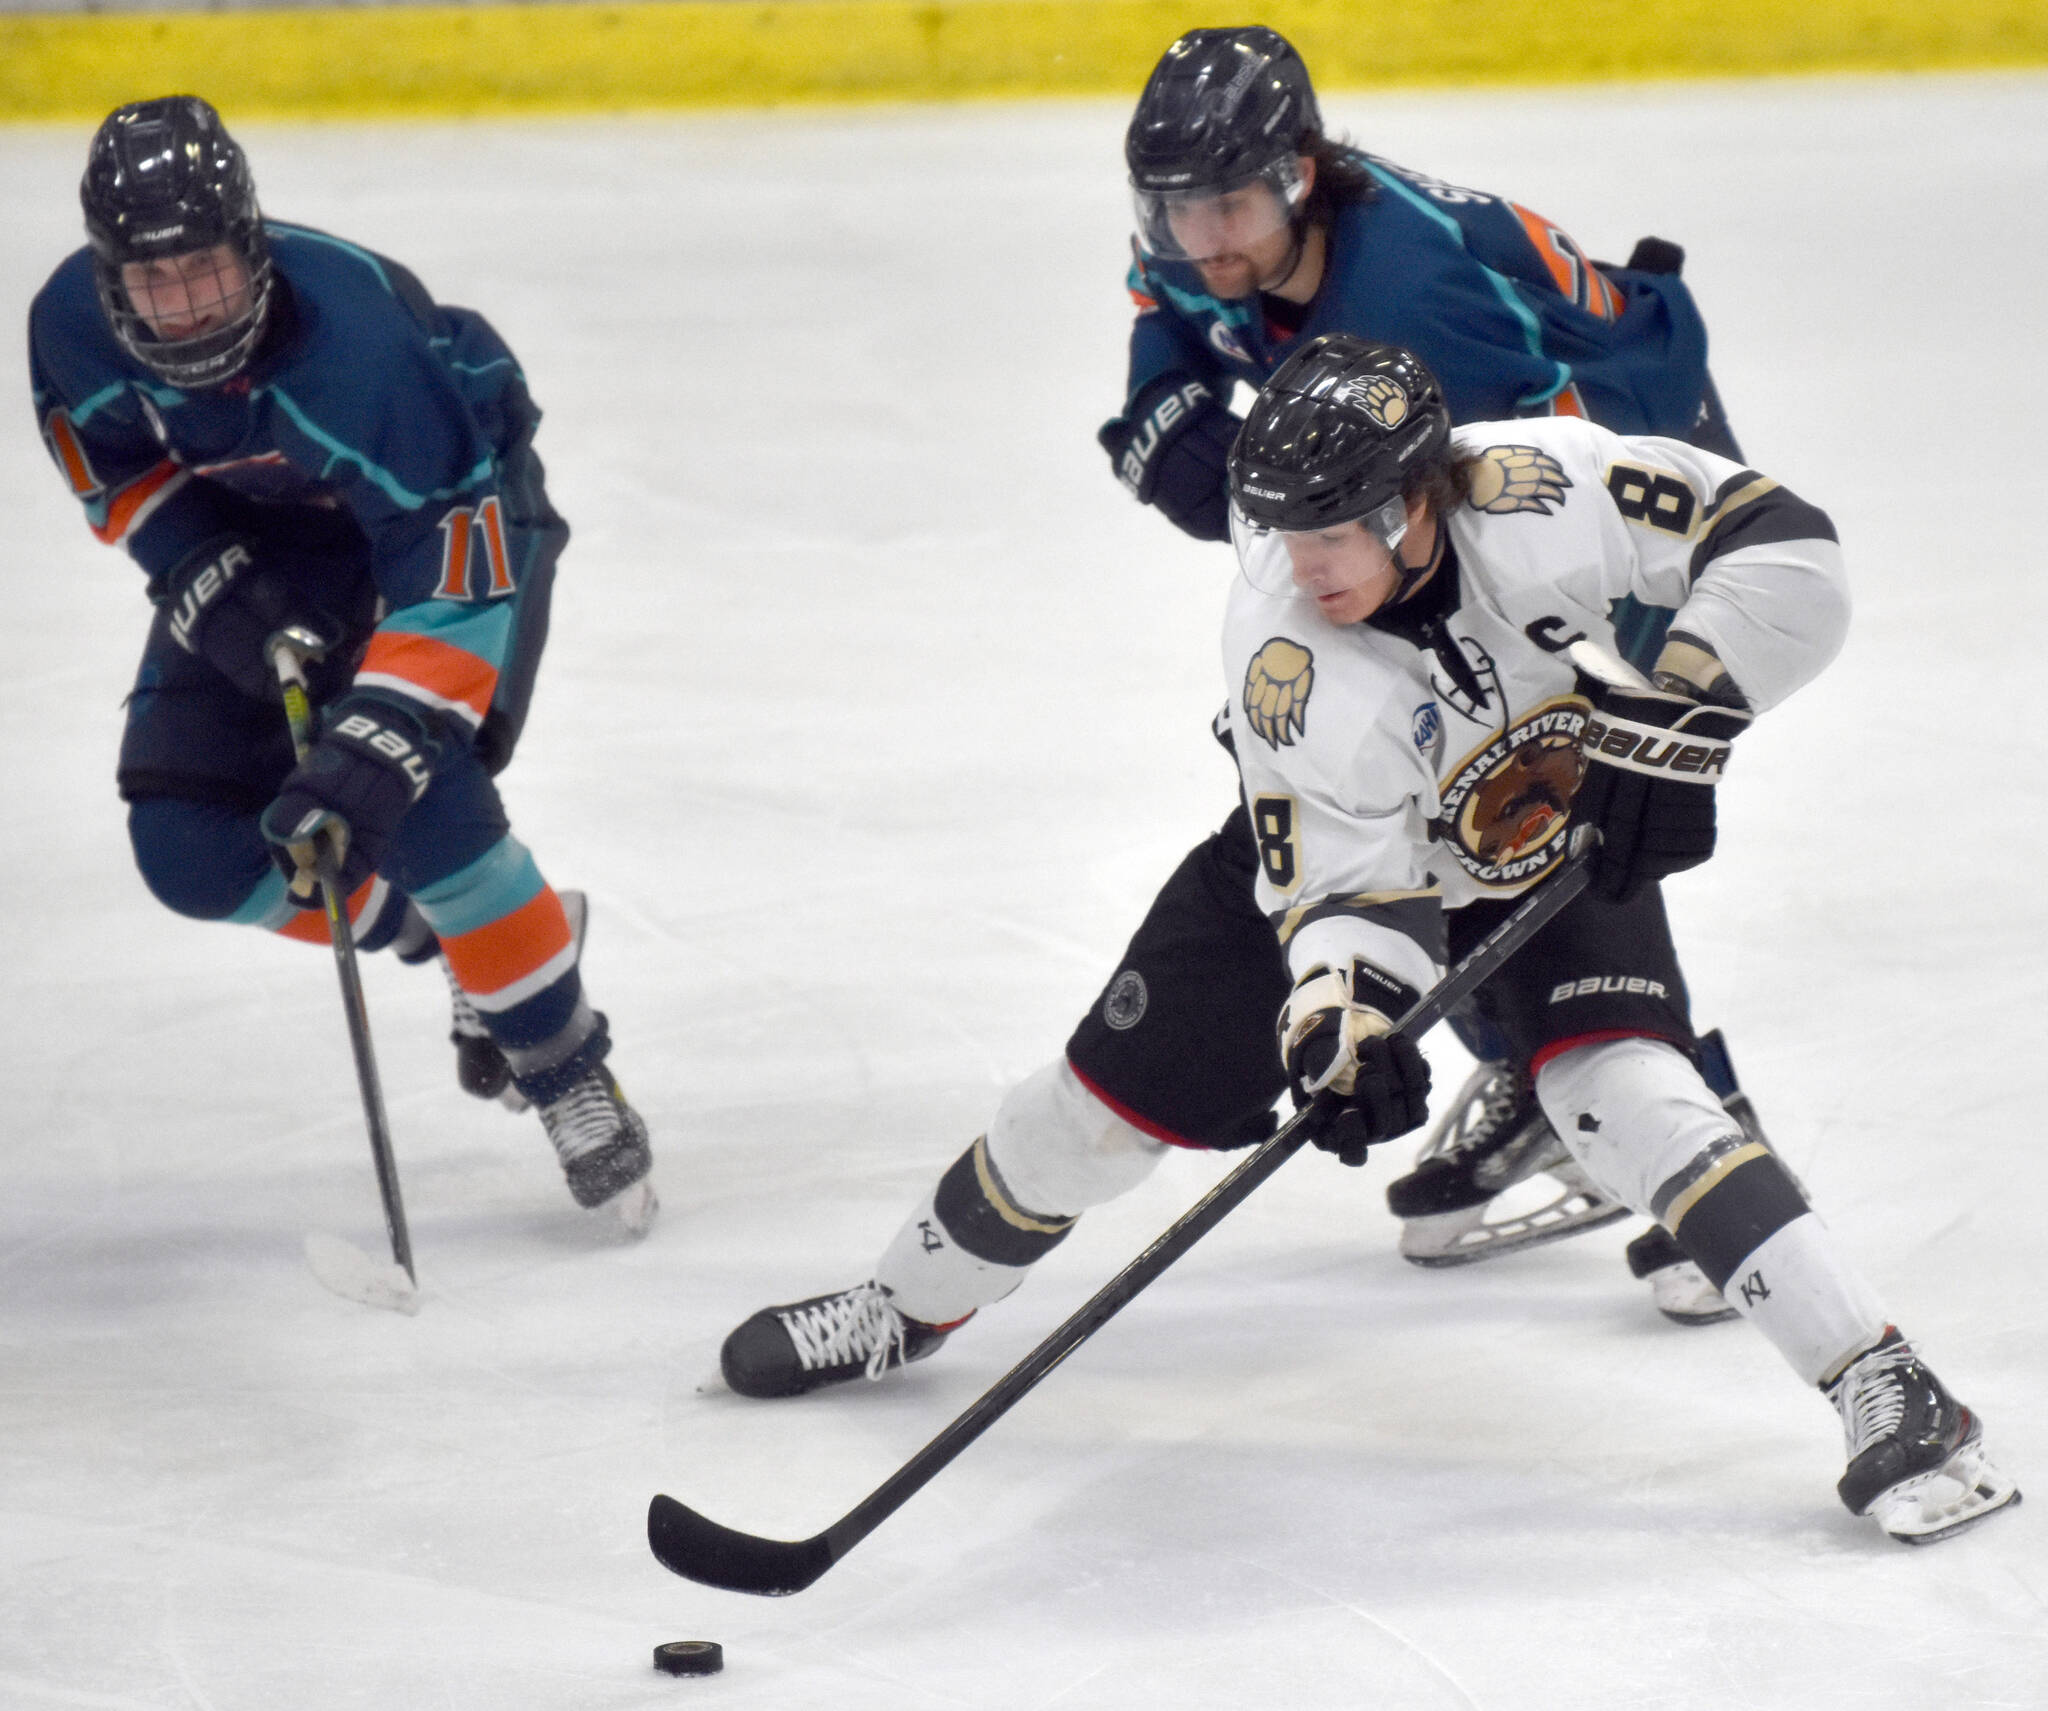 Kenai River Brown Bears forward Noah Holt takes on Luke Anderson and Kade Shea of the Anchorage Wolverines on Saturday, Dec. 3, 2022, at the Soldotna Regional Sports Complex in Soldotna, Alaska. (Photo by Jeff Helminiak/Peninsula Clarion)